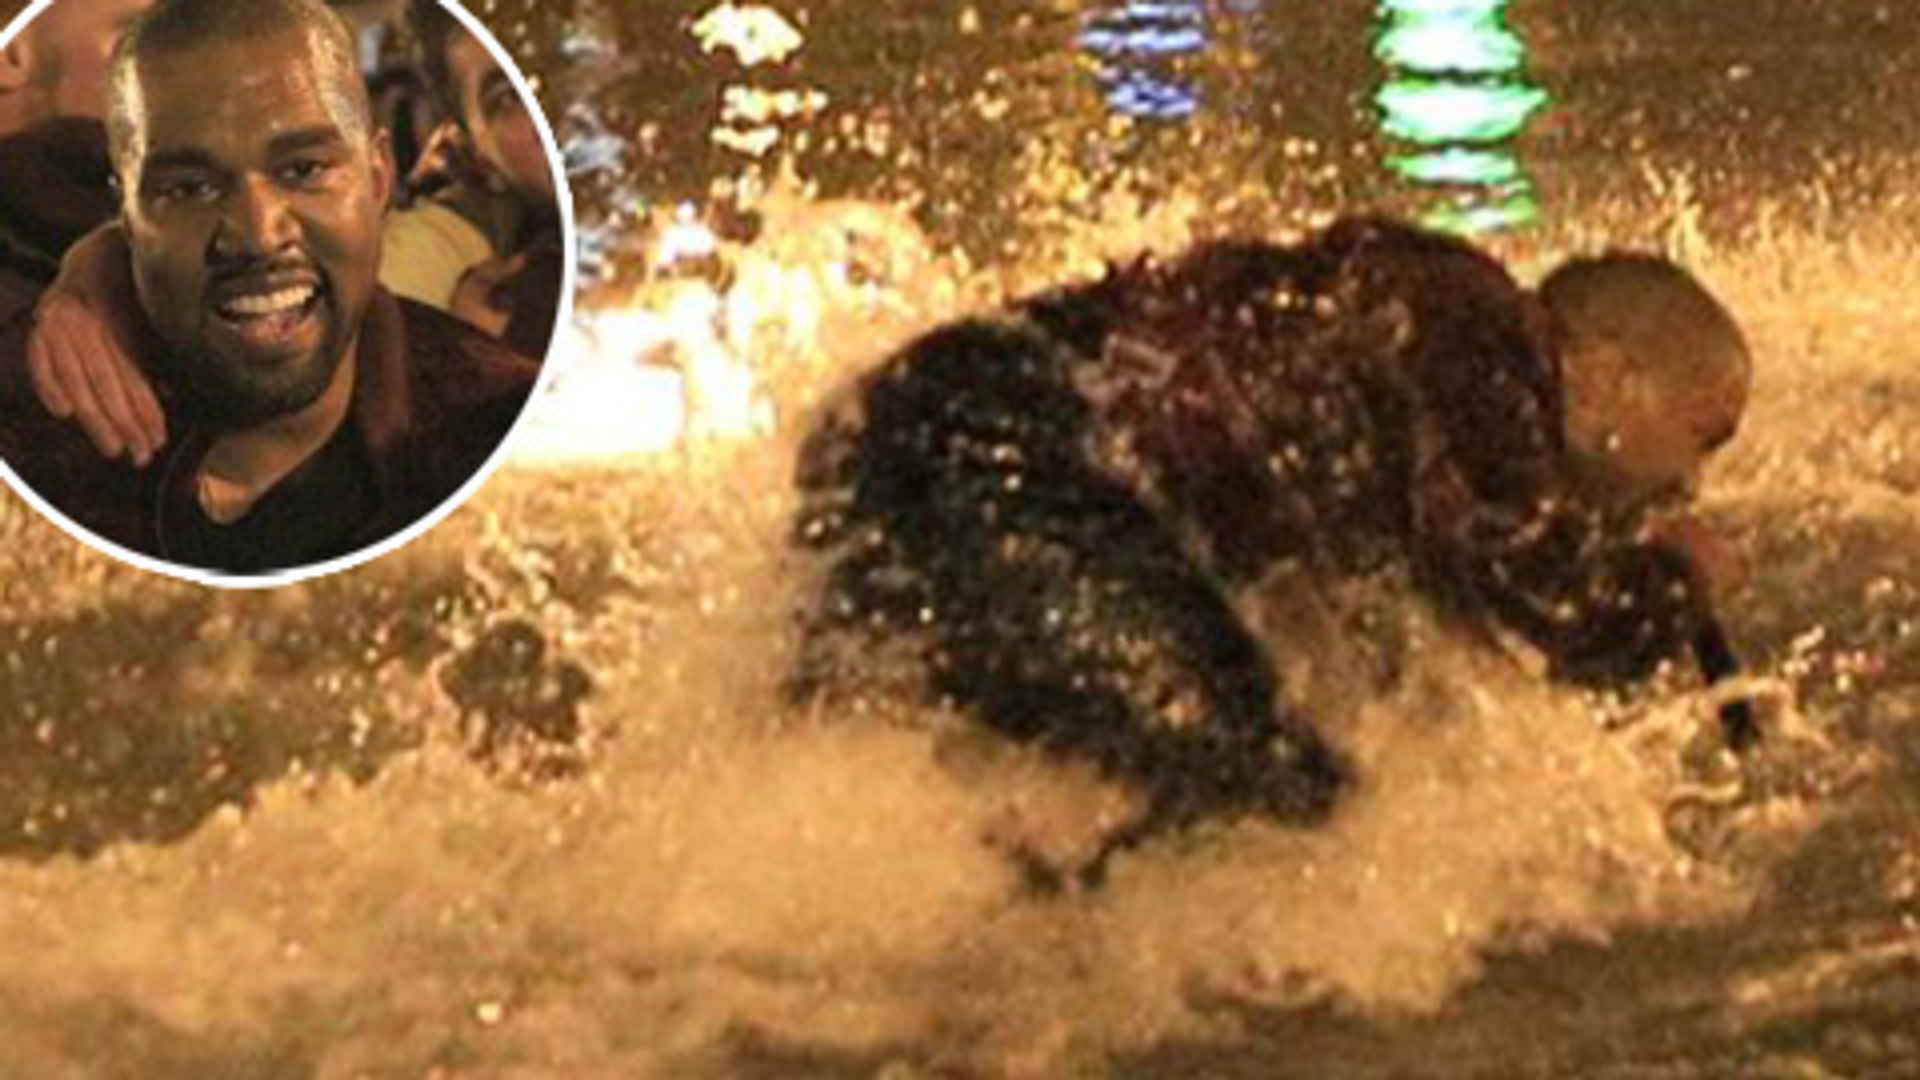 (VIDEO) Kanye West Jumps Into Pond During Concert in Armenia